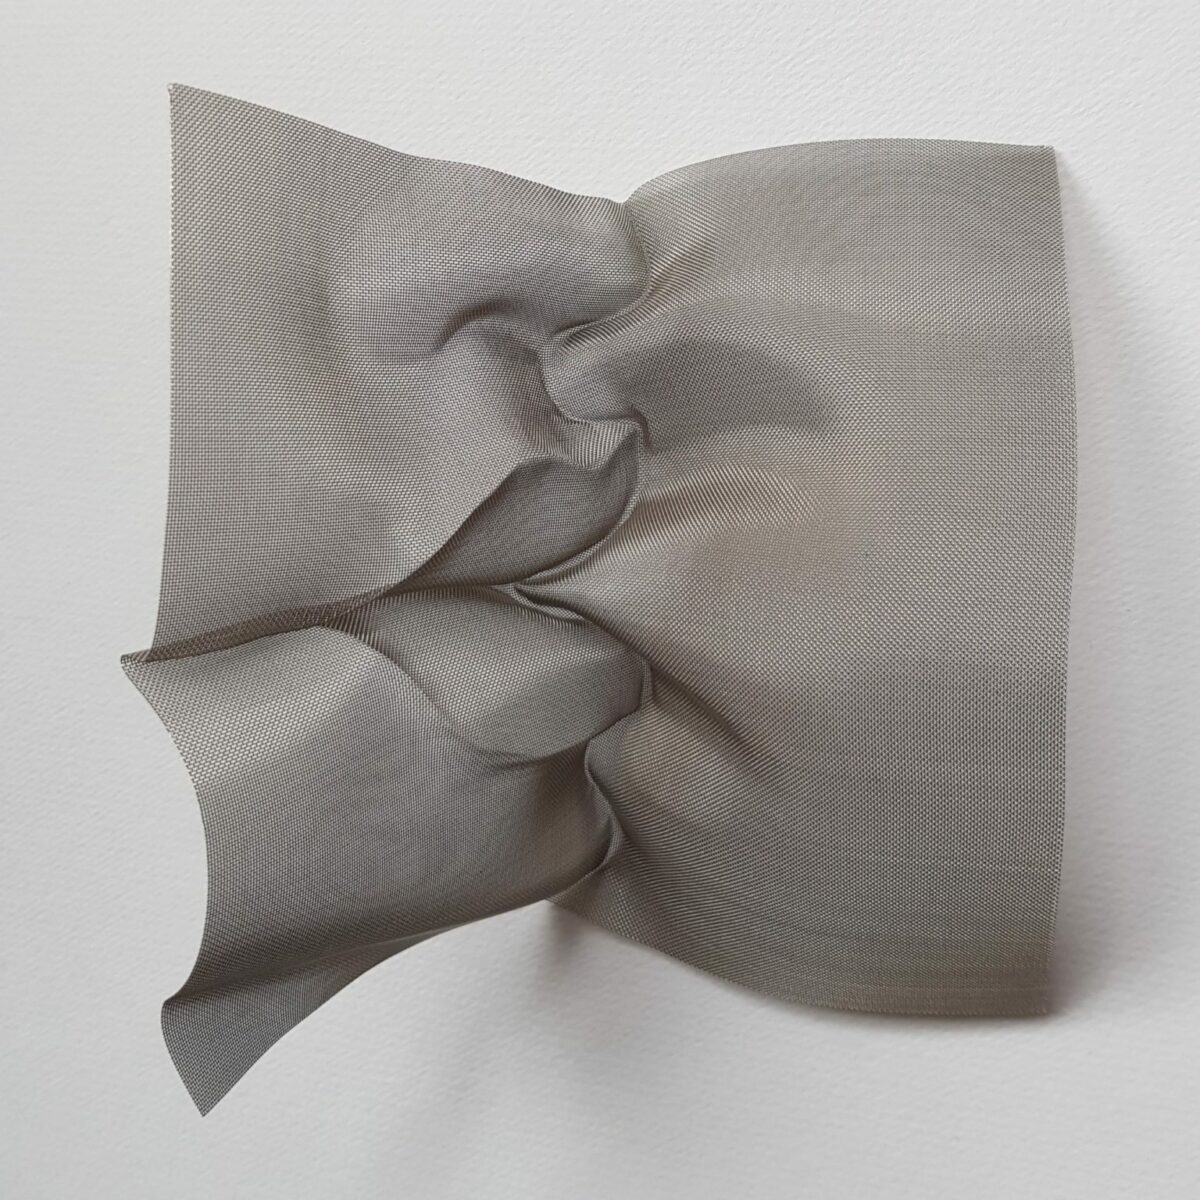 Fascinating Facial Sculptures Made From Folded Paper Sheets By Polly Verity (19)